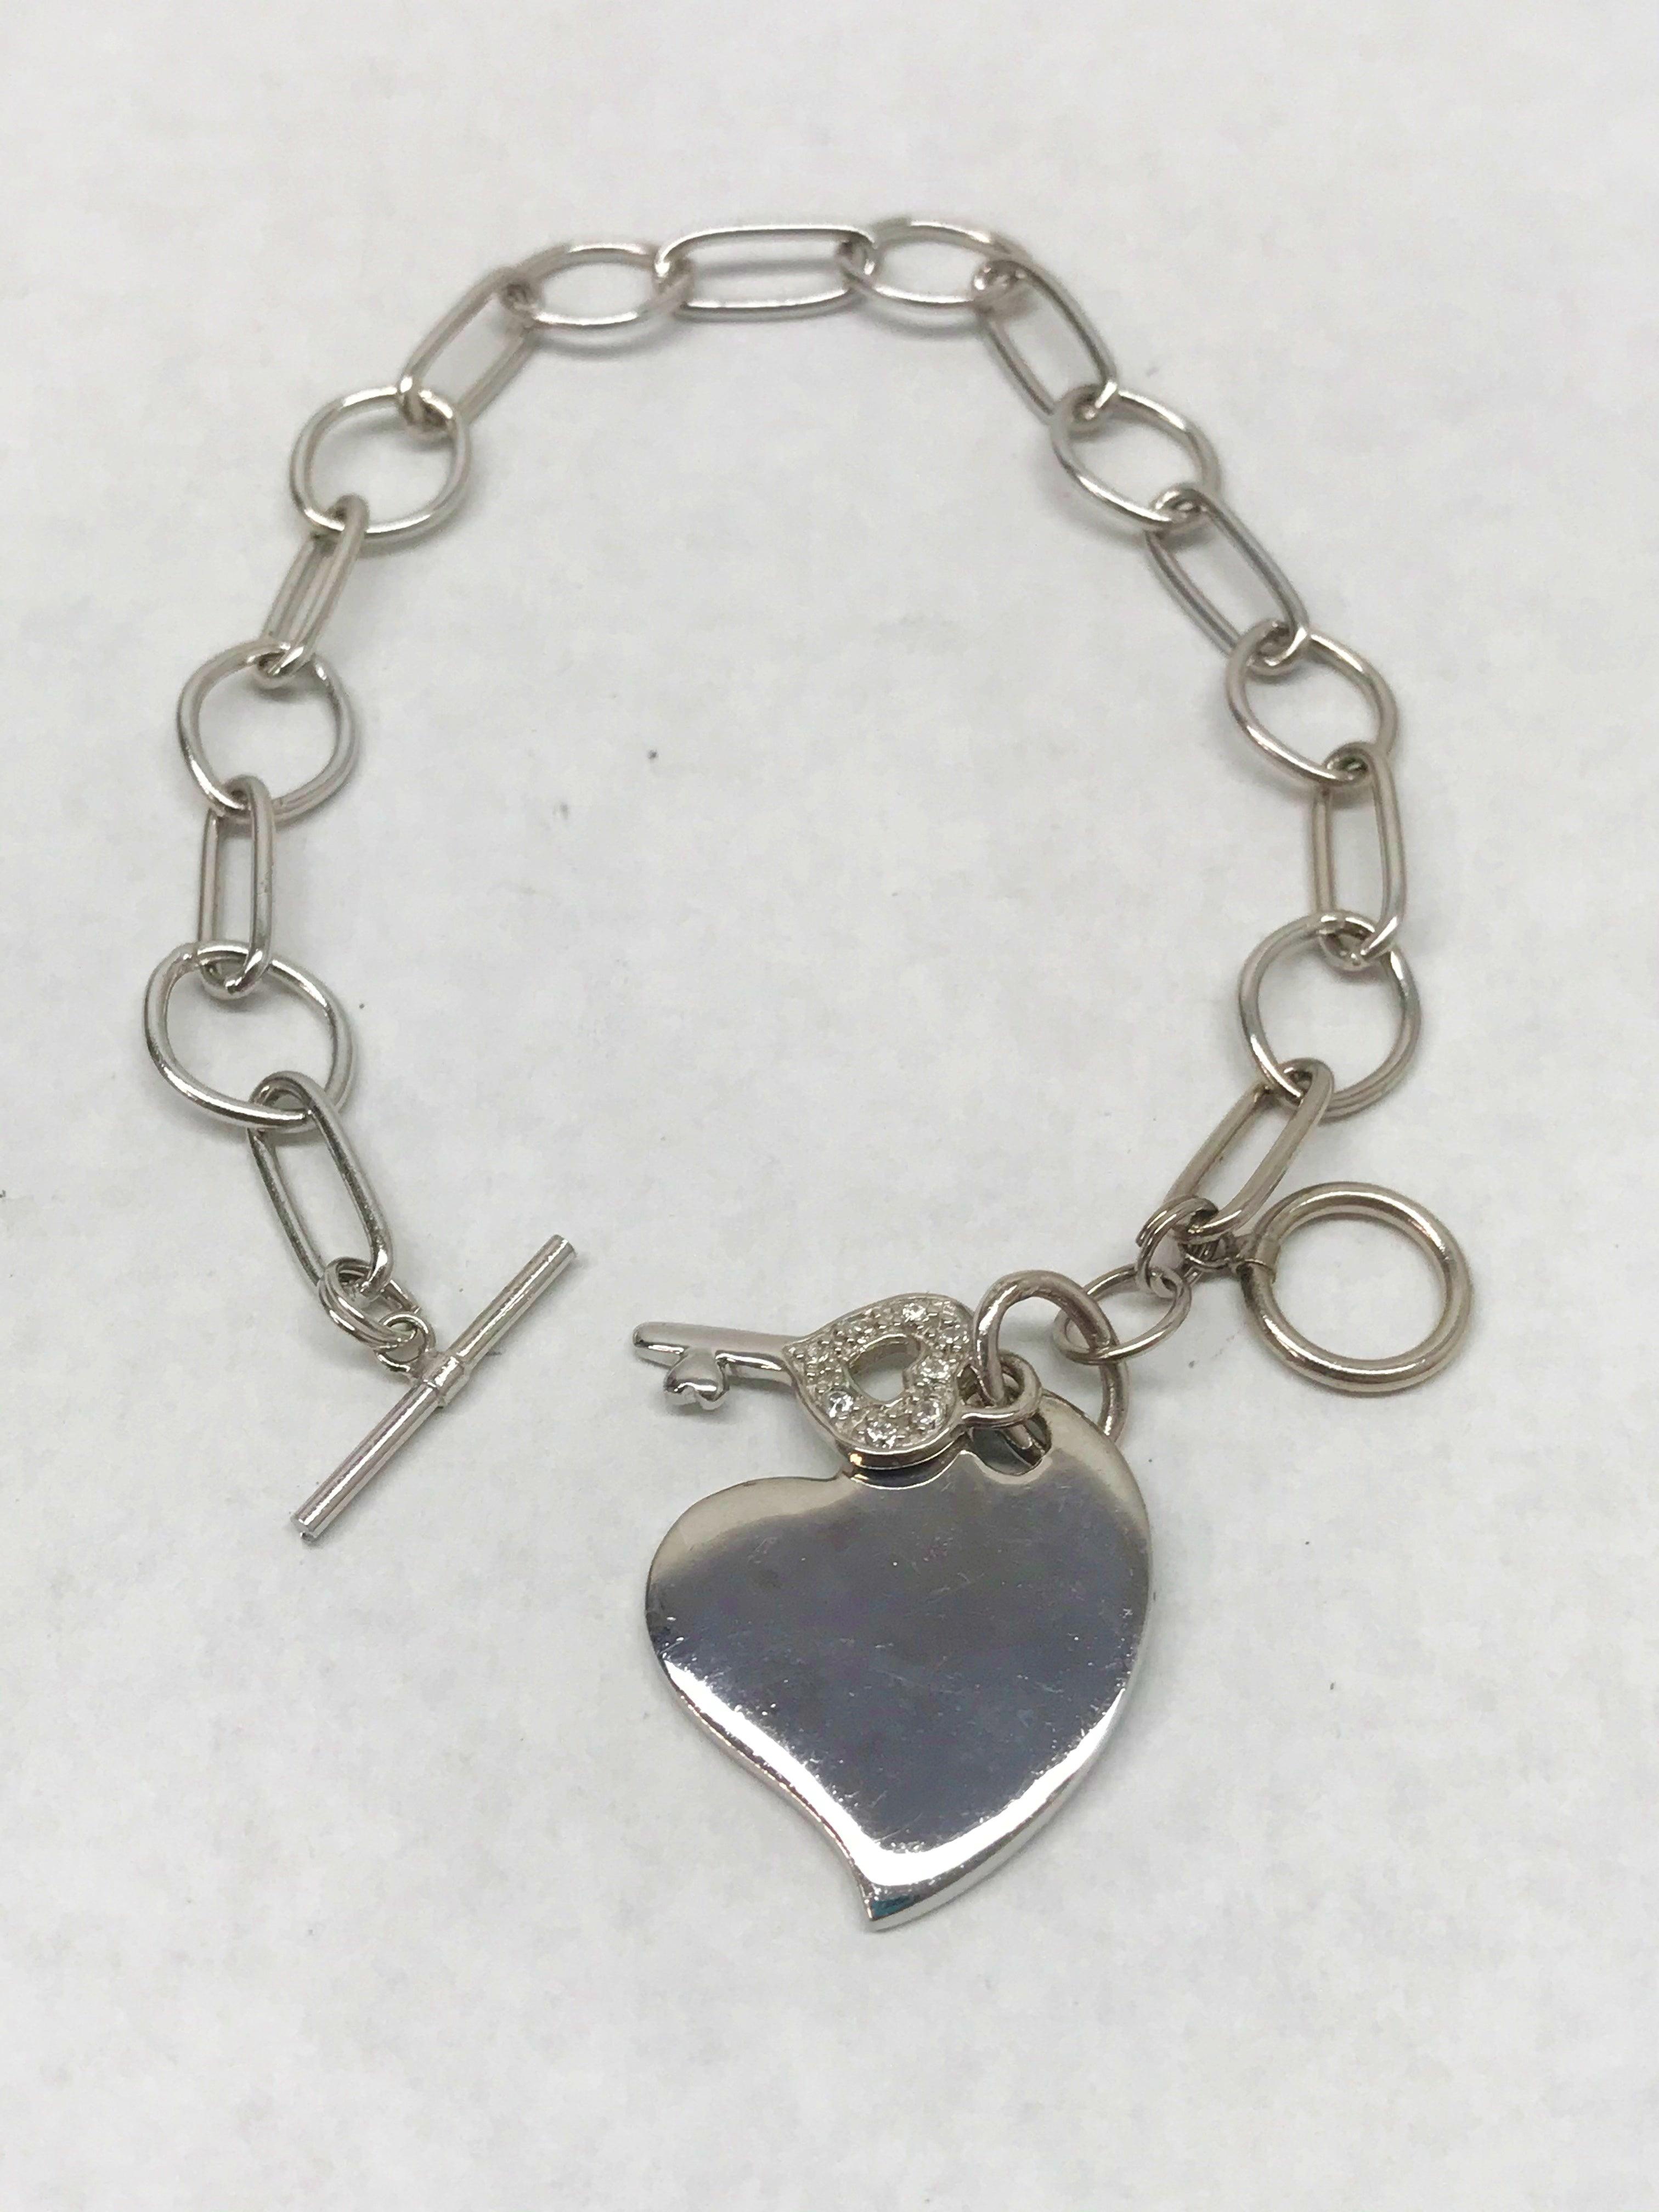 Sterling Silver Heart With Key Charms and Chain Link Bracelet